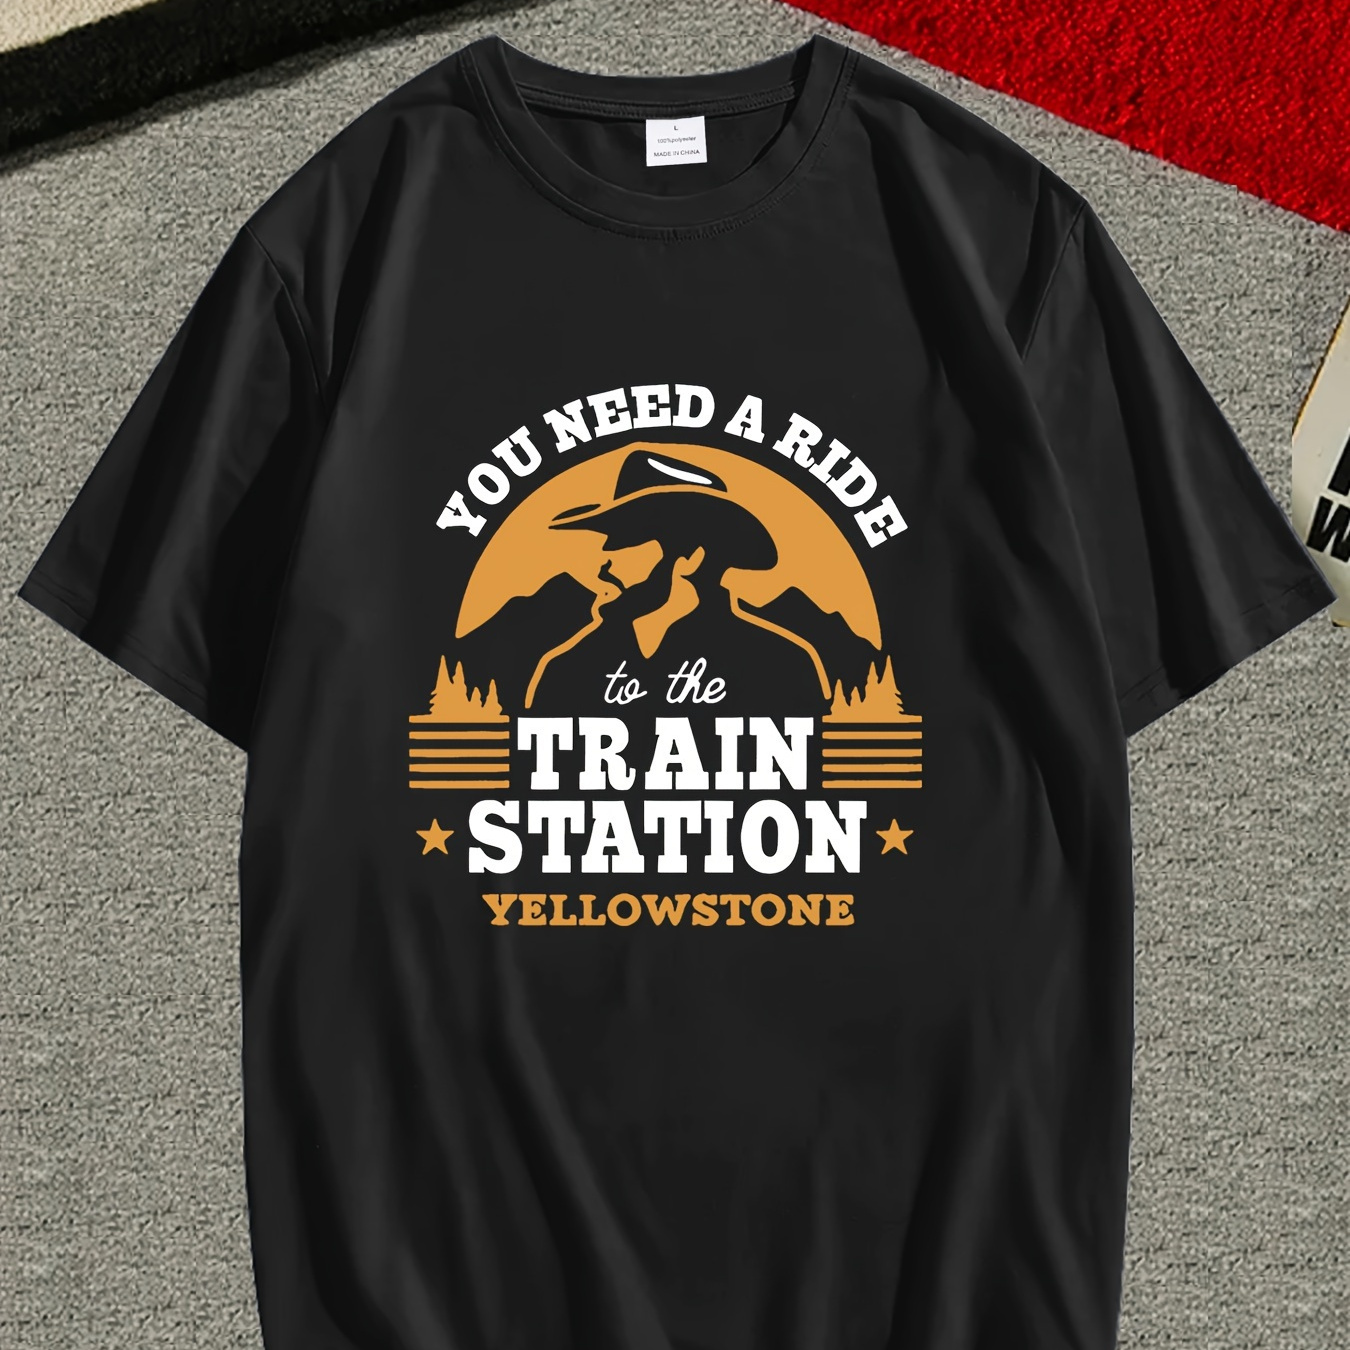 

Train Station Print Crew Neck T-shirt For Men, Casual Short Sleeve Top, Men's Clothing For Spring/summer